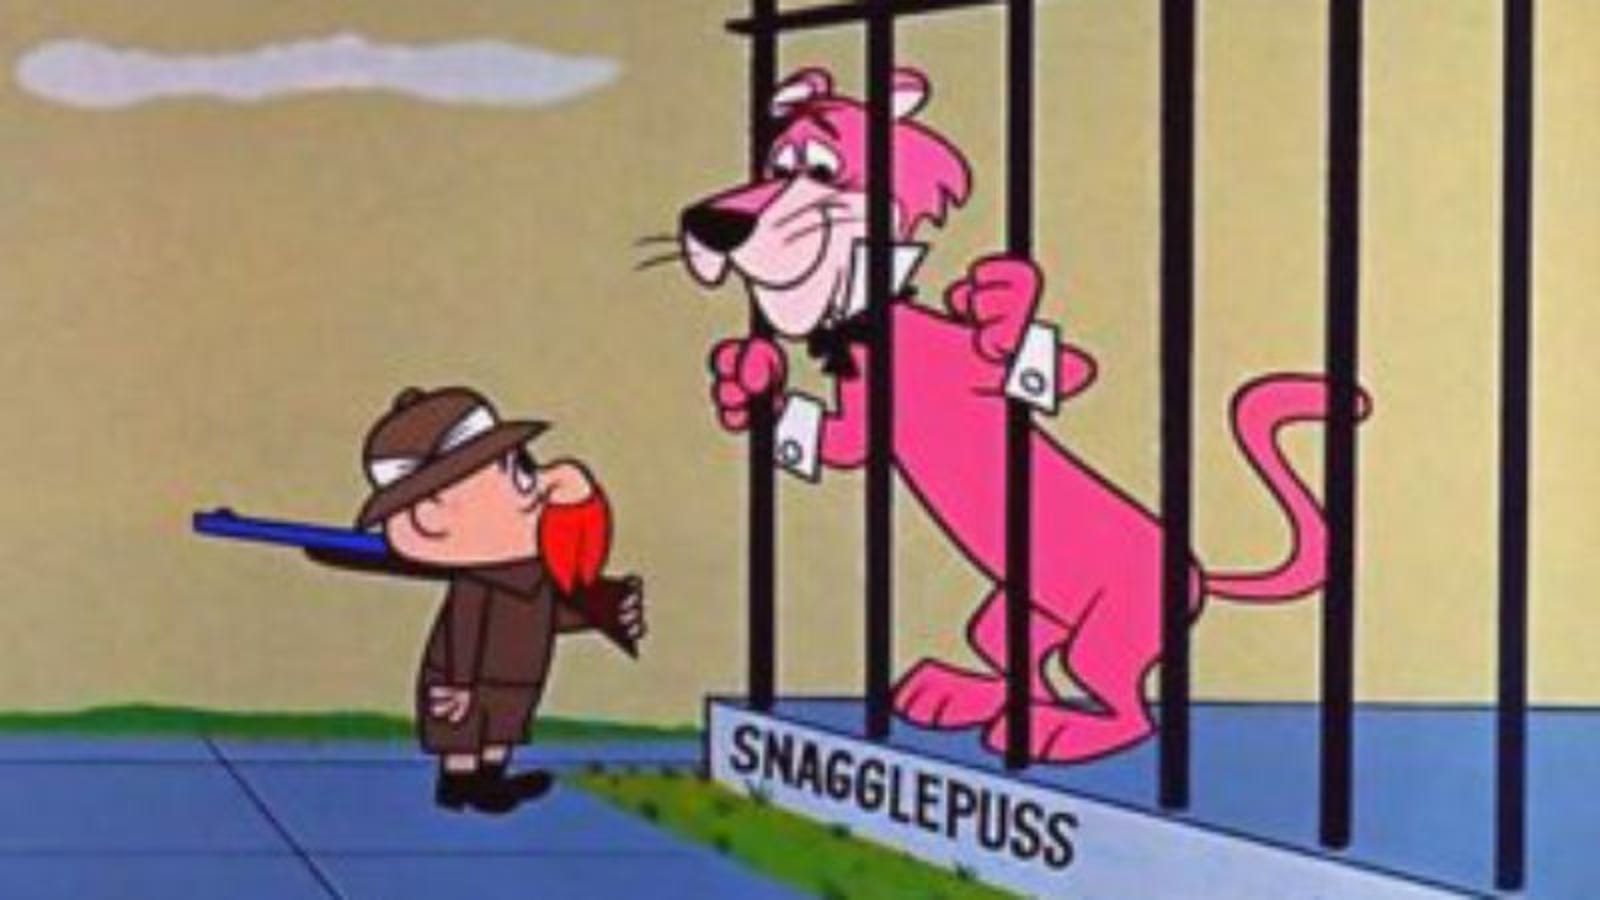 New Comic Series Reimagines Snagglepuss As A Gay 1950s Playwright